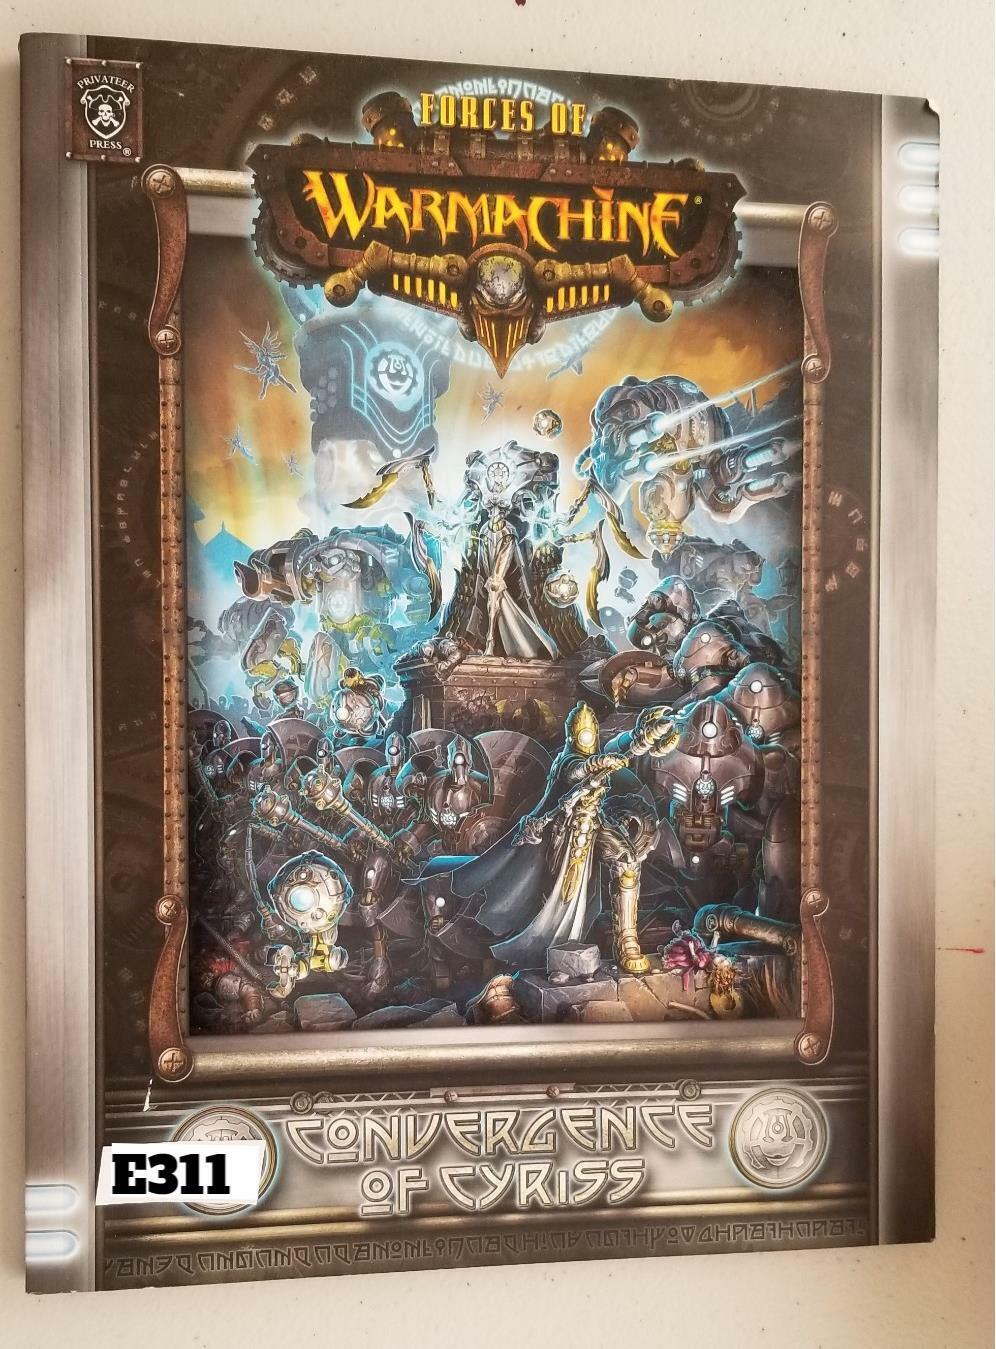 PP Warmachine Convergence of Cyriss Soft Cover Good Cond.